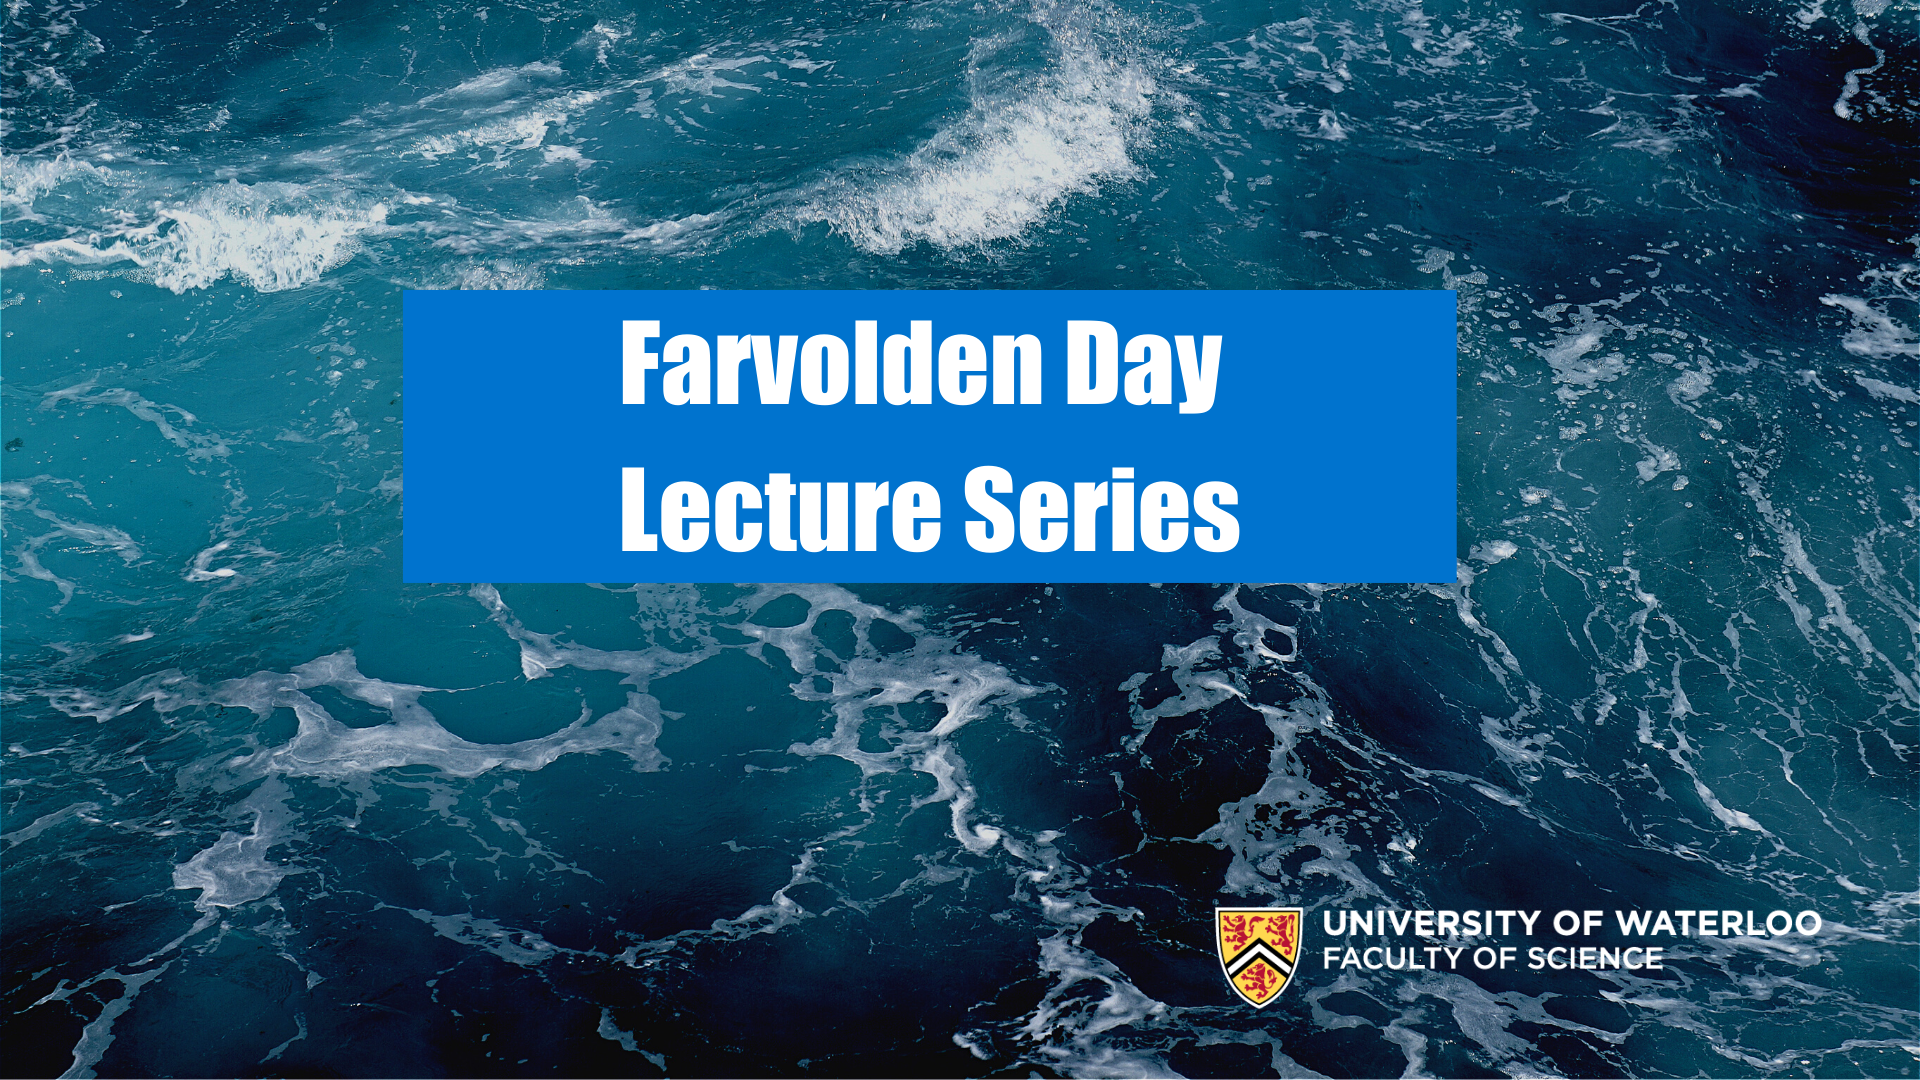 Farvolden Day Lecture Series event image with blue ocean